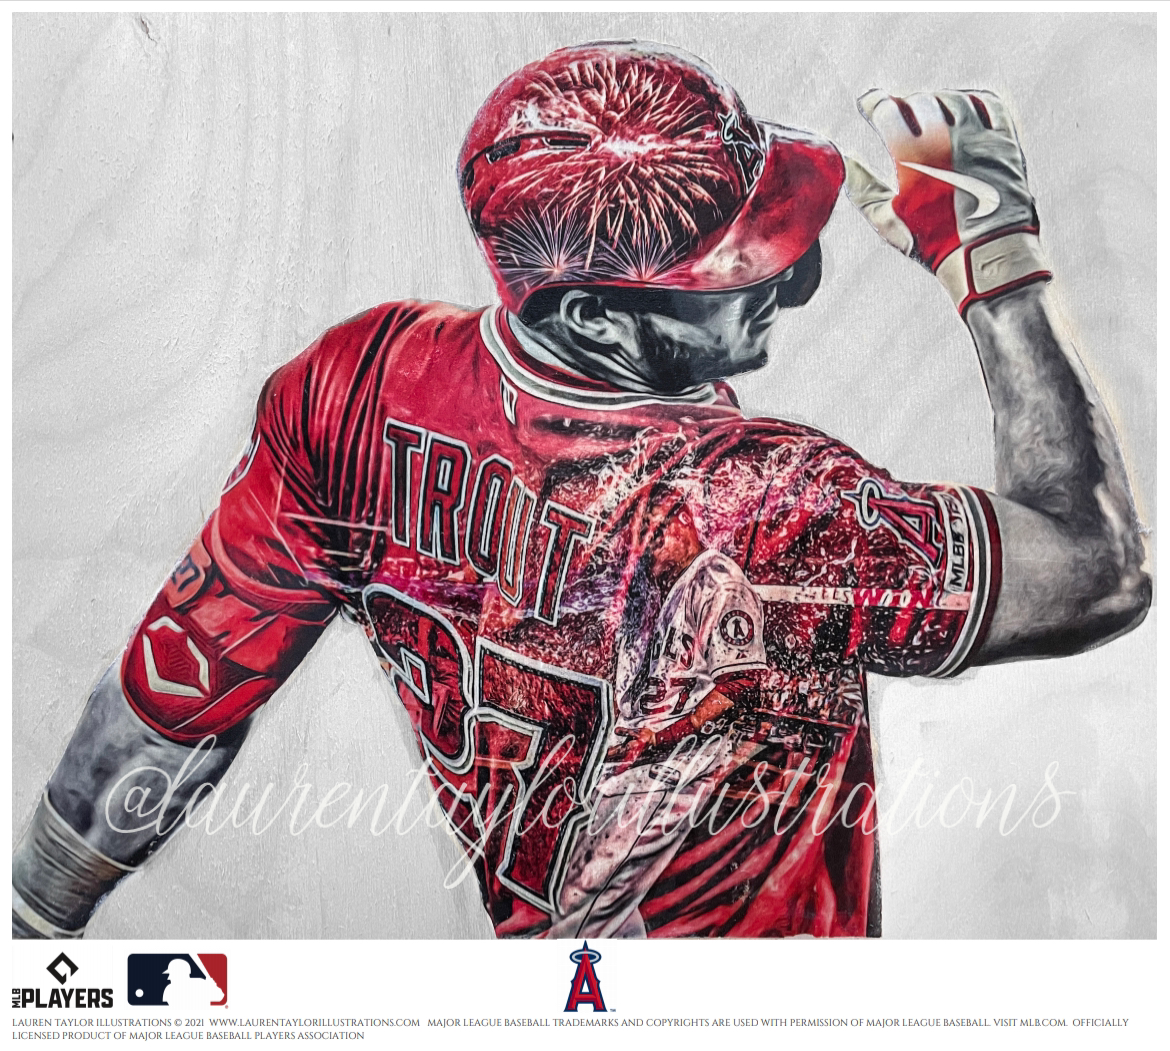 Mike Trout Signed Angels 16x20 photo (MLB)